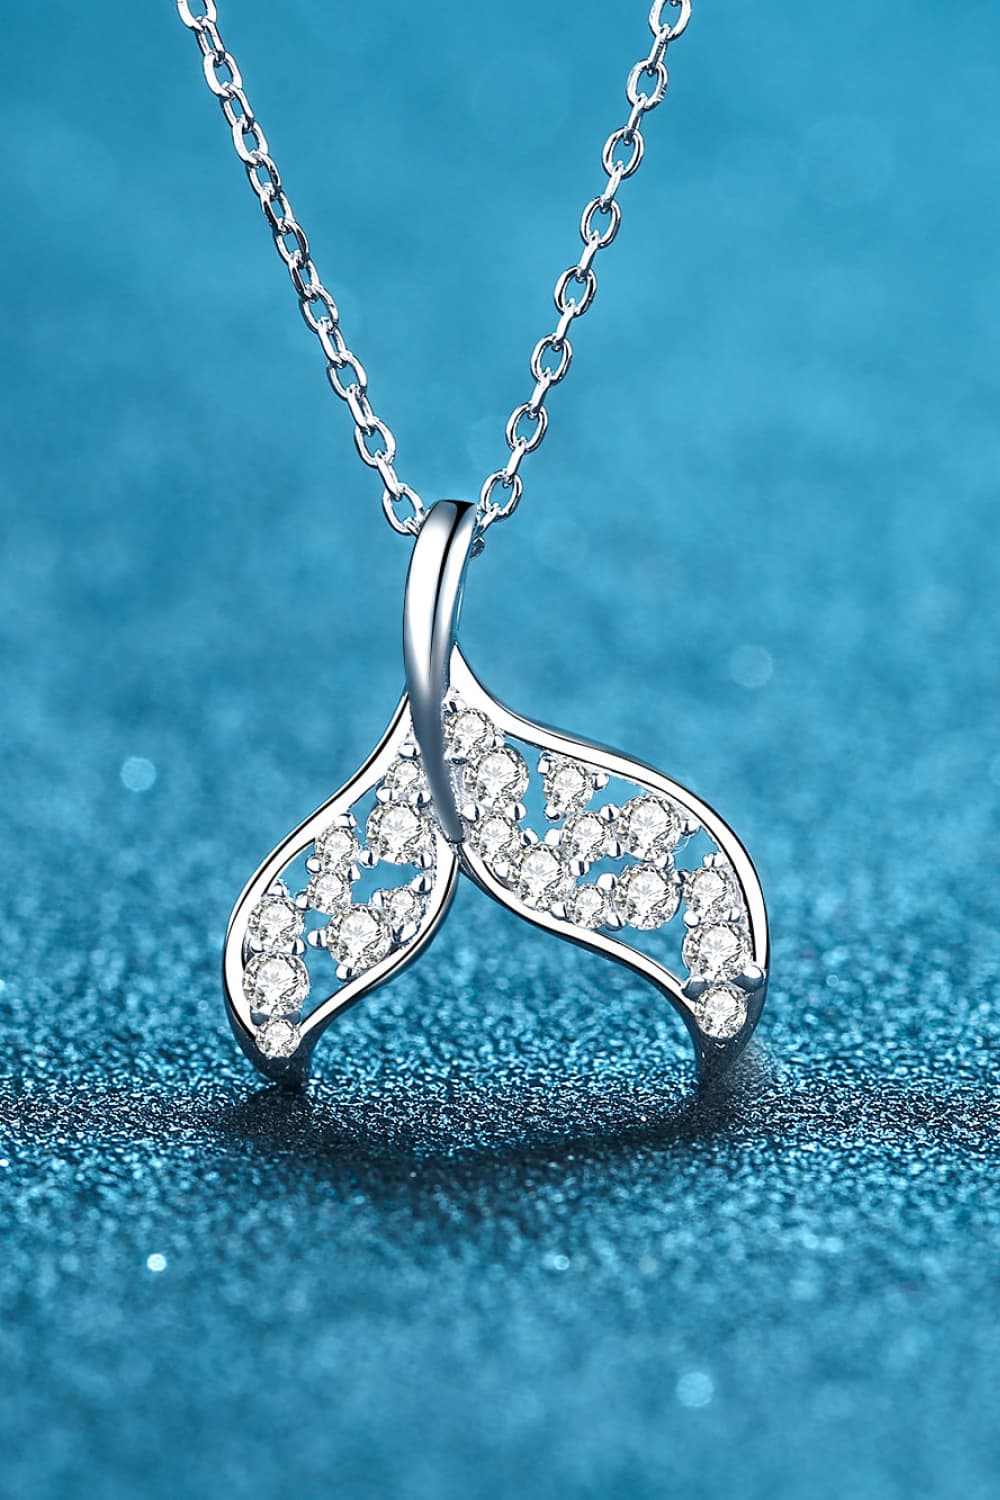 Moissanite Fishtail Pendant 925 Sterling Silver Necklace - Necklaces - FITGGINS